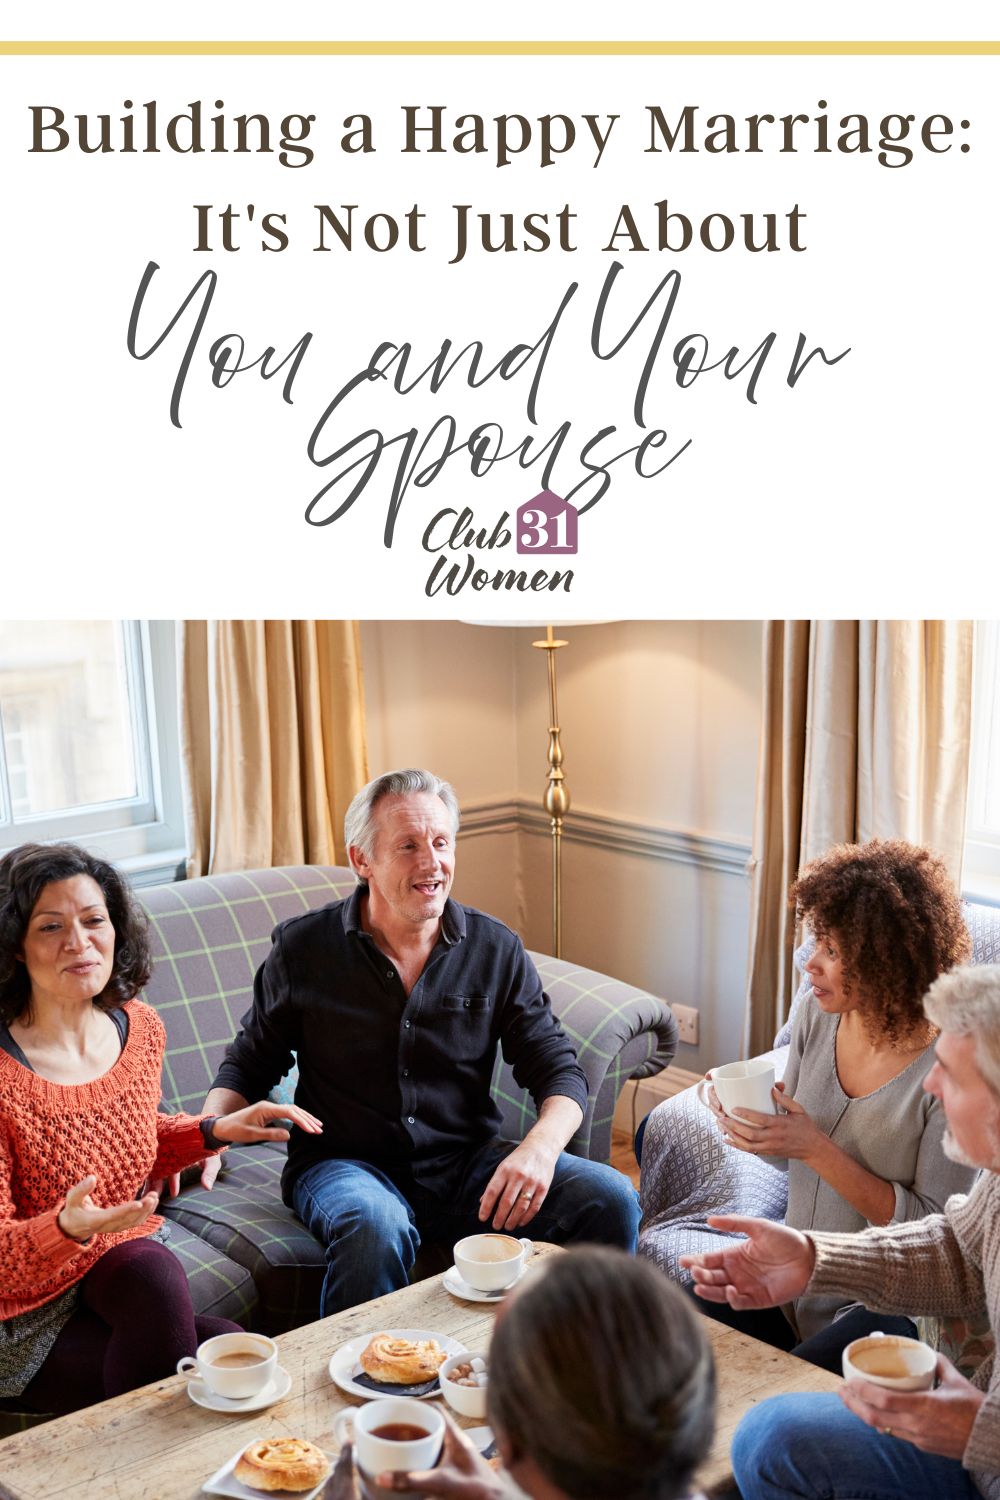 Creating a happy marriage depends on each spouse living for God and seeking to serve the other. It's not all about what you get from it. via @Club31Women